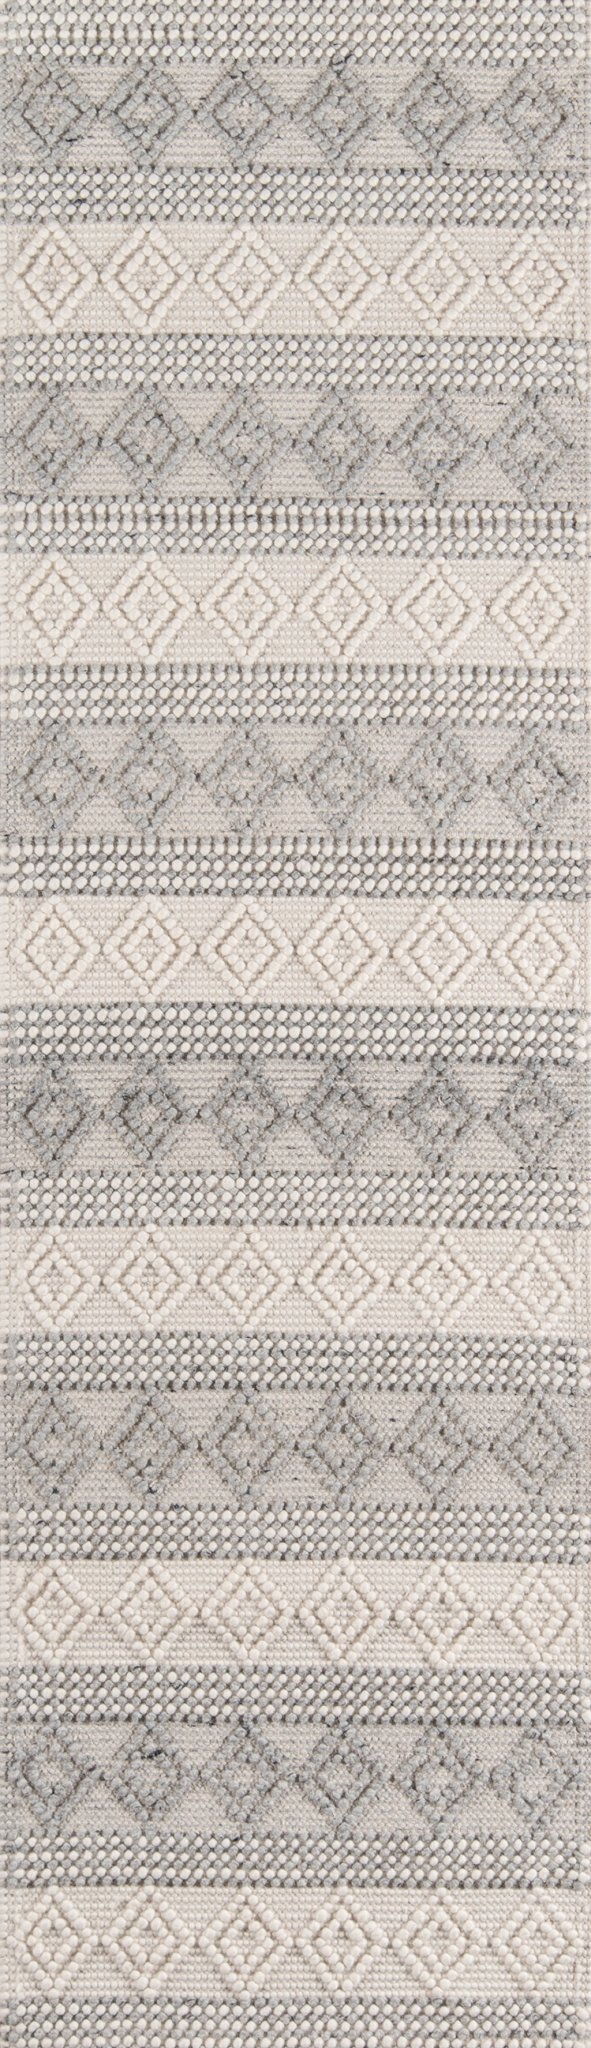 Andes Hand Woven Rug, Ivory - BlueJay Avenue